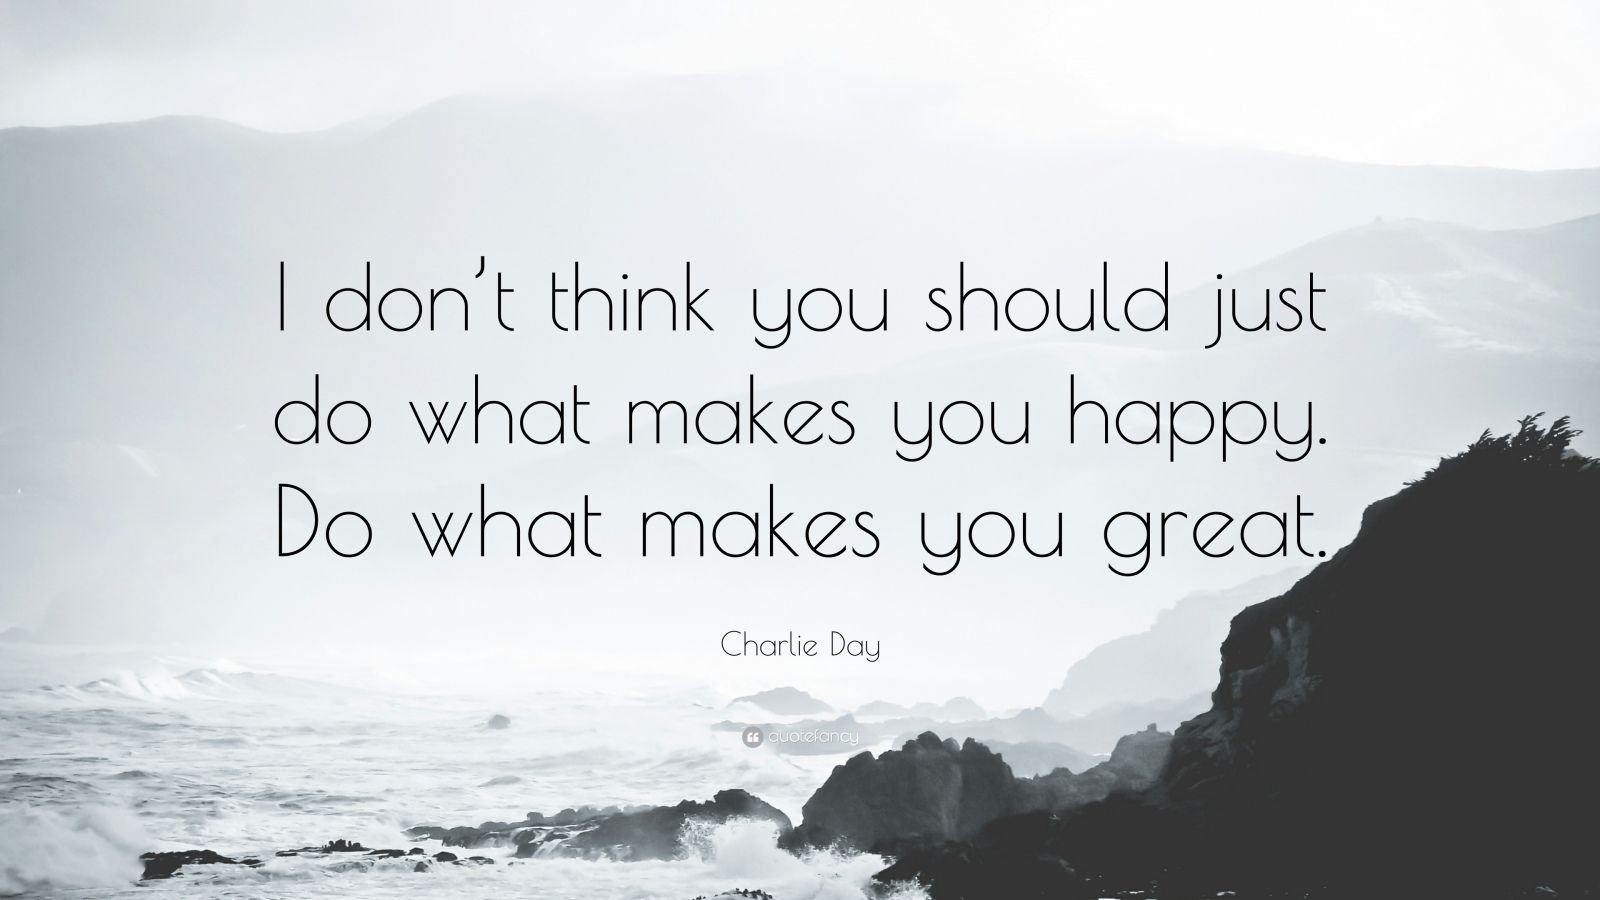 Charlie Day Quote: “I don’t think you should just do what makes you